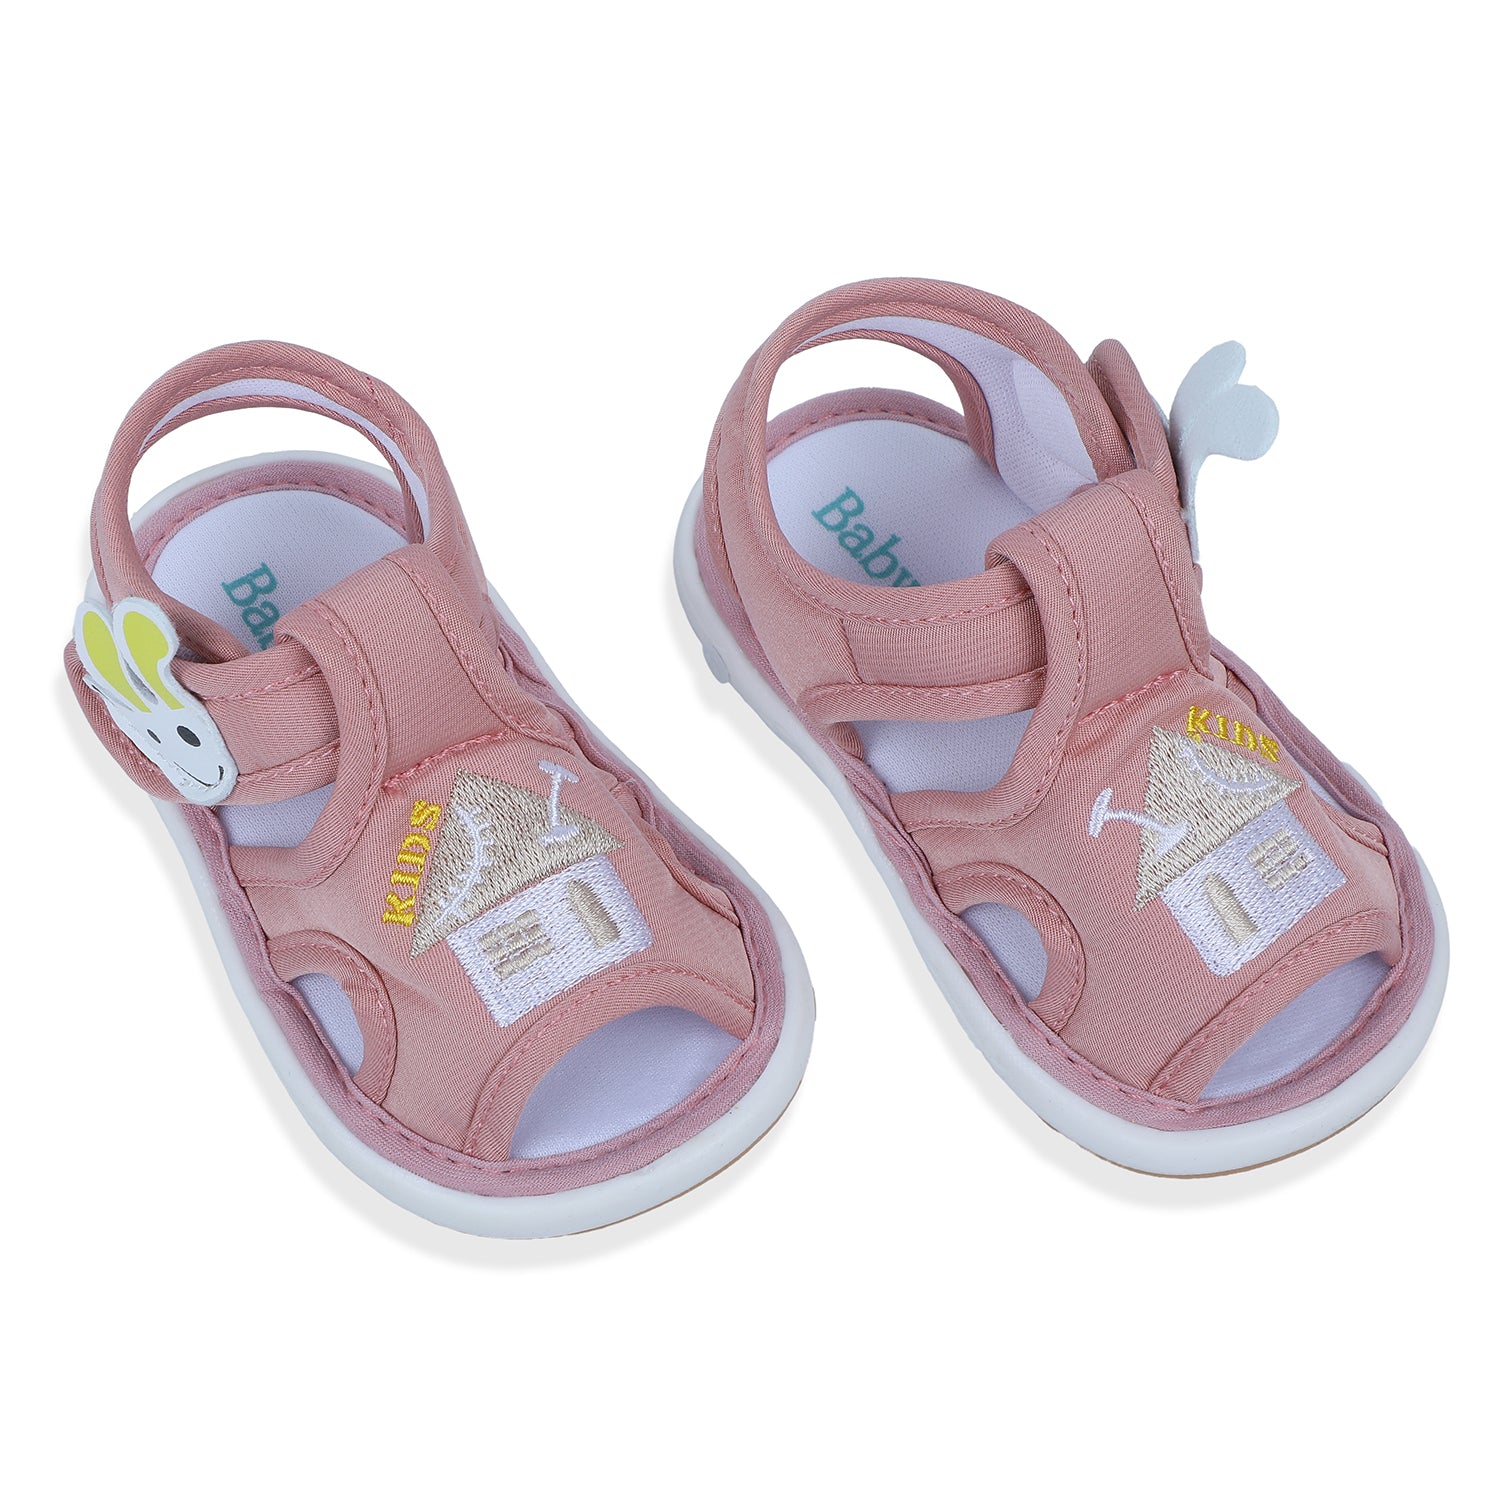 Baby Moo My Pet's House Chu-Chu Sound Breathable Anti-Skid Sandals - Pink